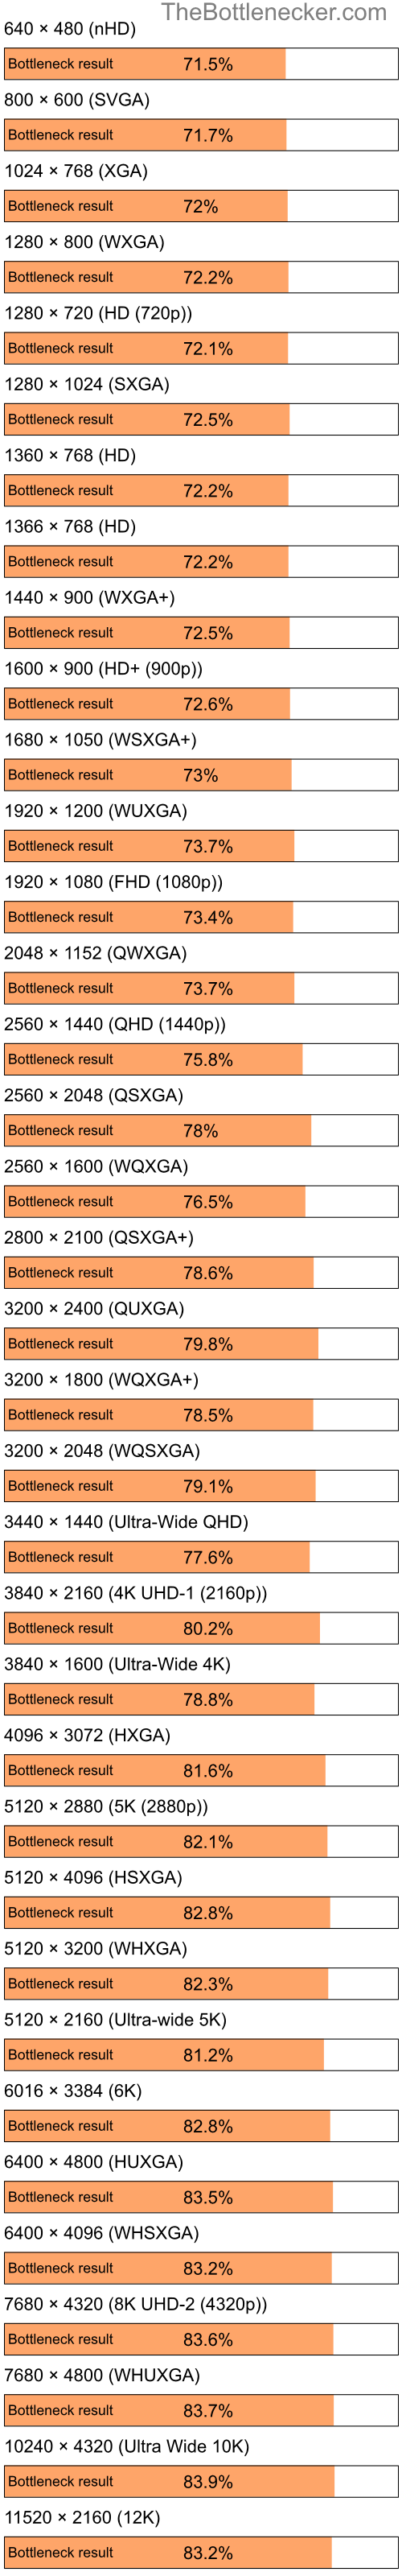 Bottleneck results by resolution for Intel Celeron and AMD Mobility Radeon HD 2300 in7 Days to Die